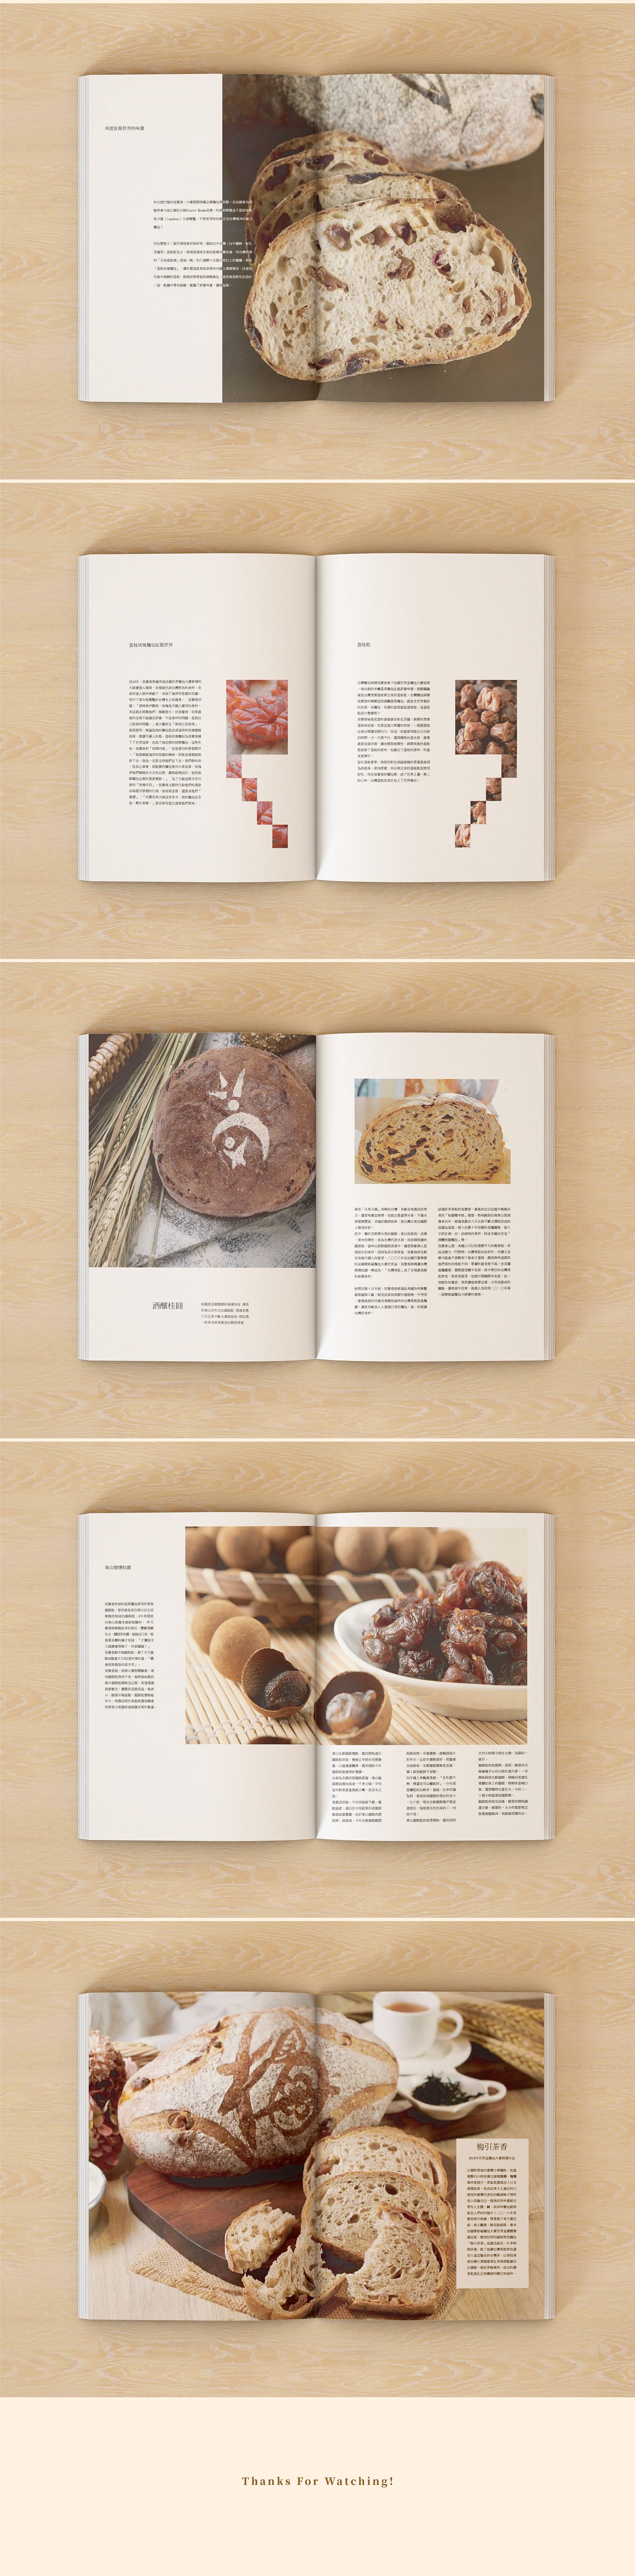 baking bread design editorial graphic Layout TaiwanDesign taiwanFeature 台灣，特色，烘焙，食物，設計，編排，平面 Bookdesign